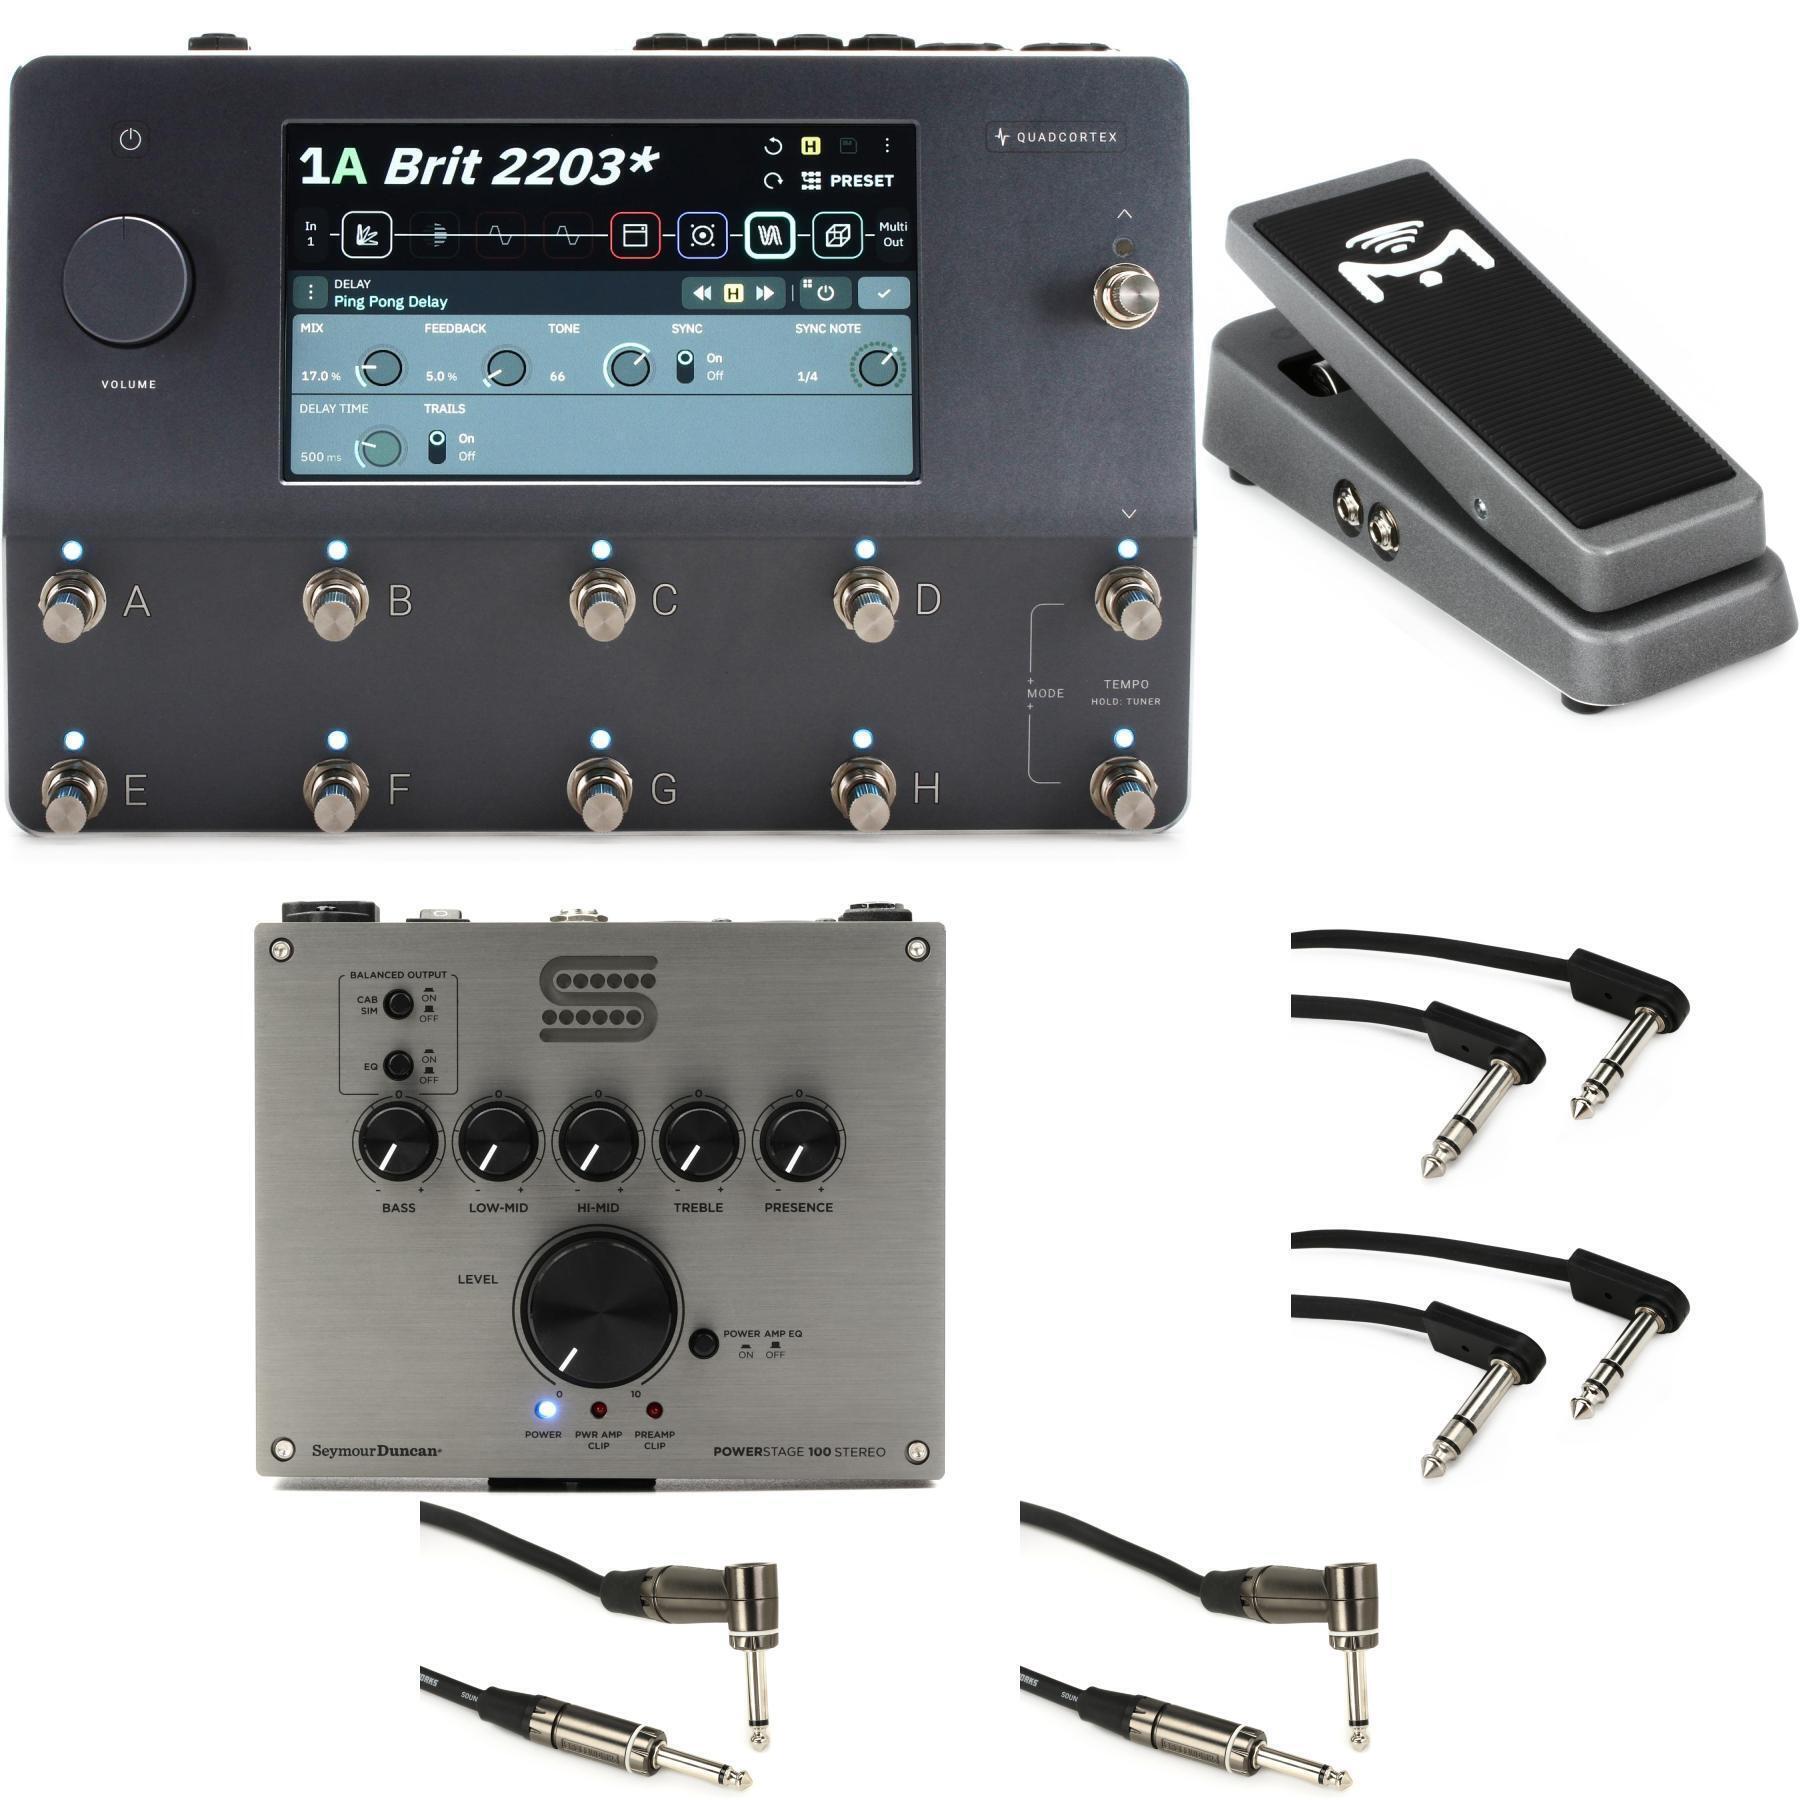 Neural DSP Quad Cortex Quad-Core Digital Effects Modeler/Profiling  Floorboard and Seymour Duncan PowerStage 100 Stereo Bundle